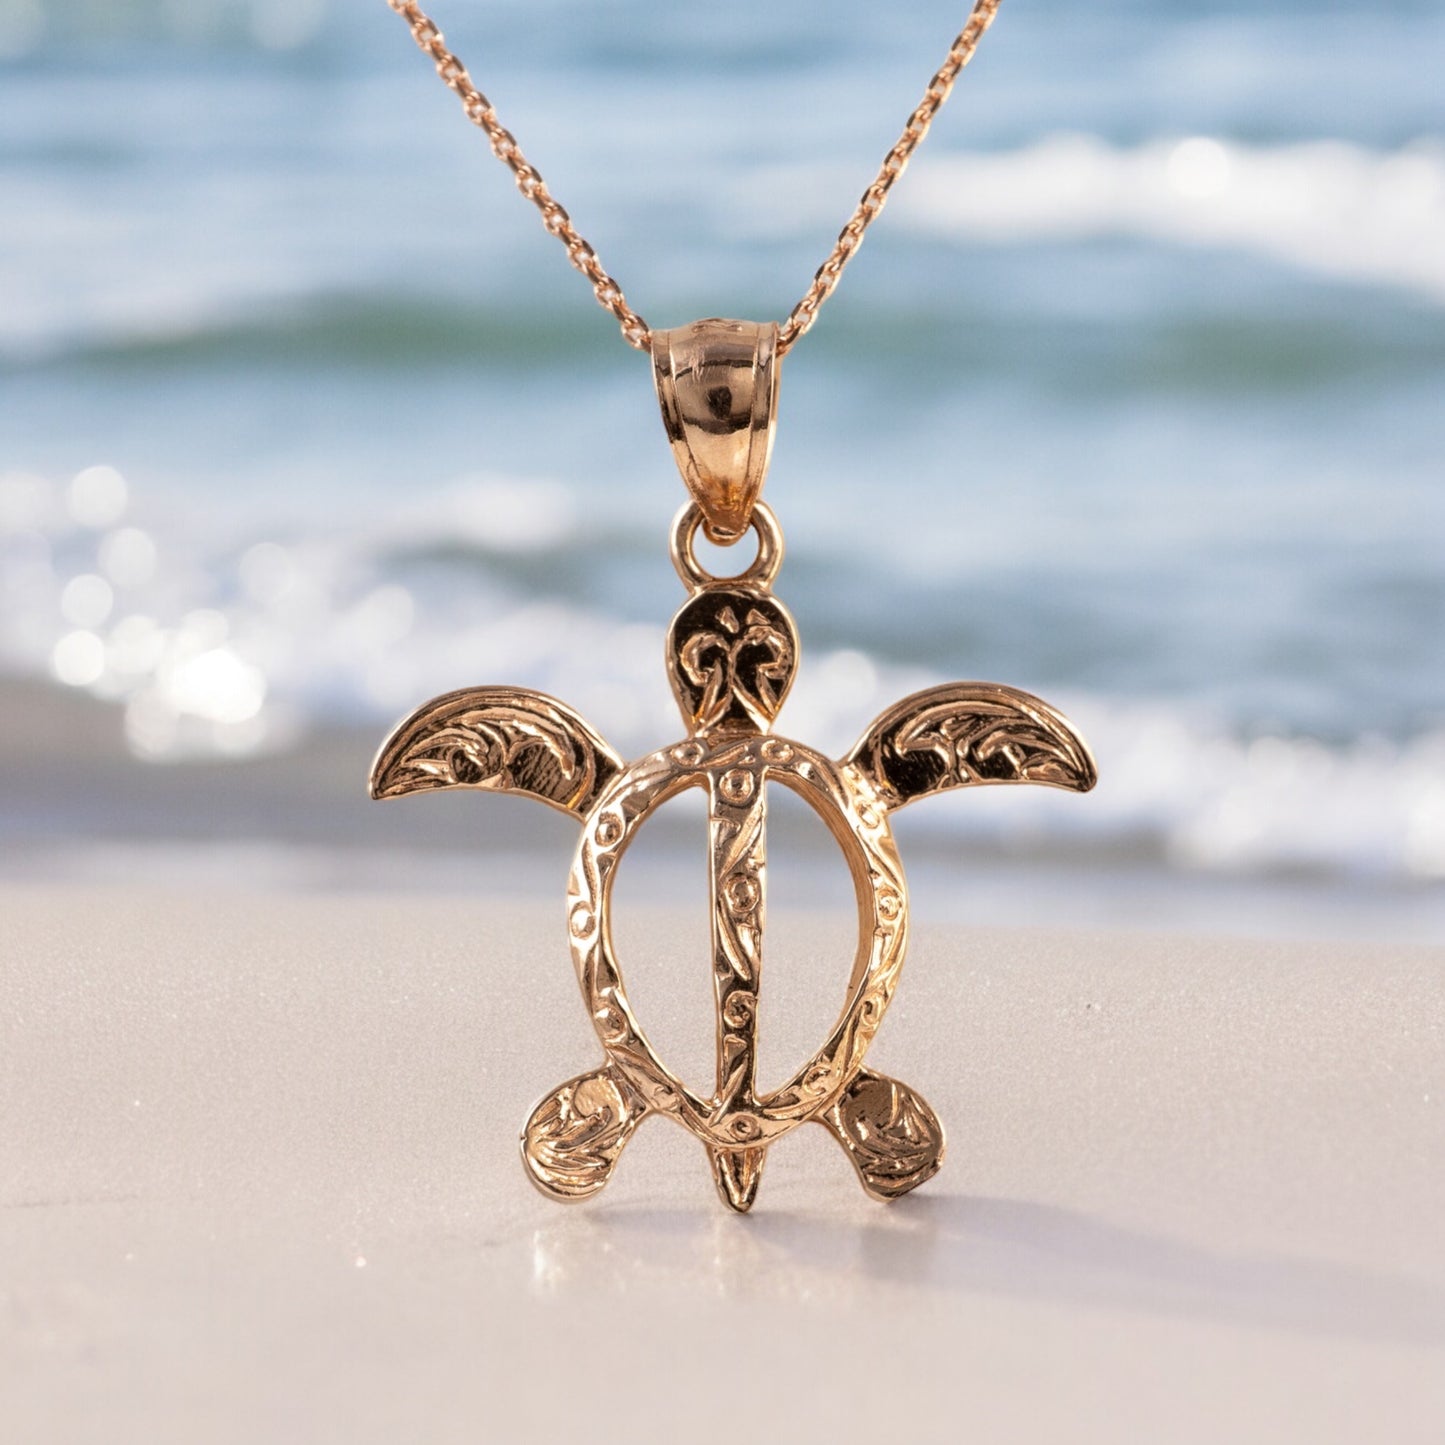 ocean jewellery gifts rose gold turtle charm